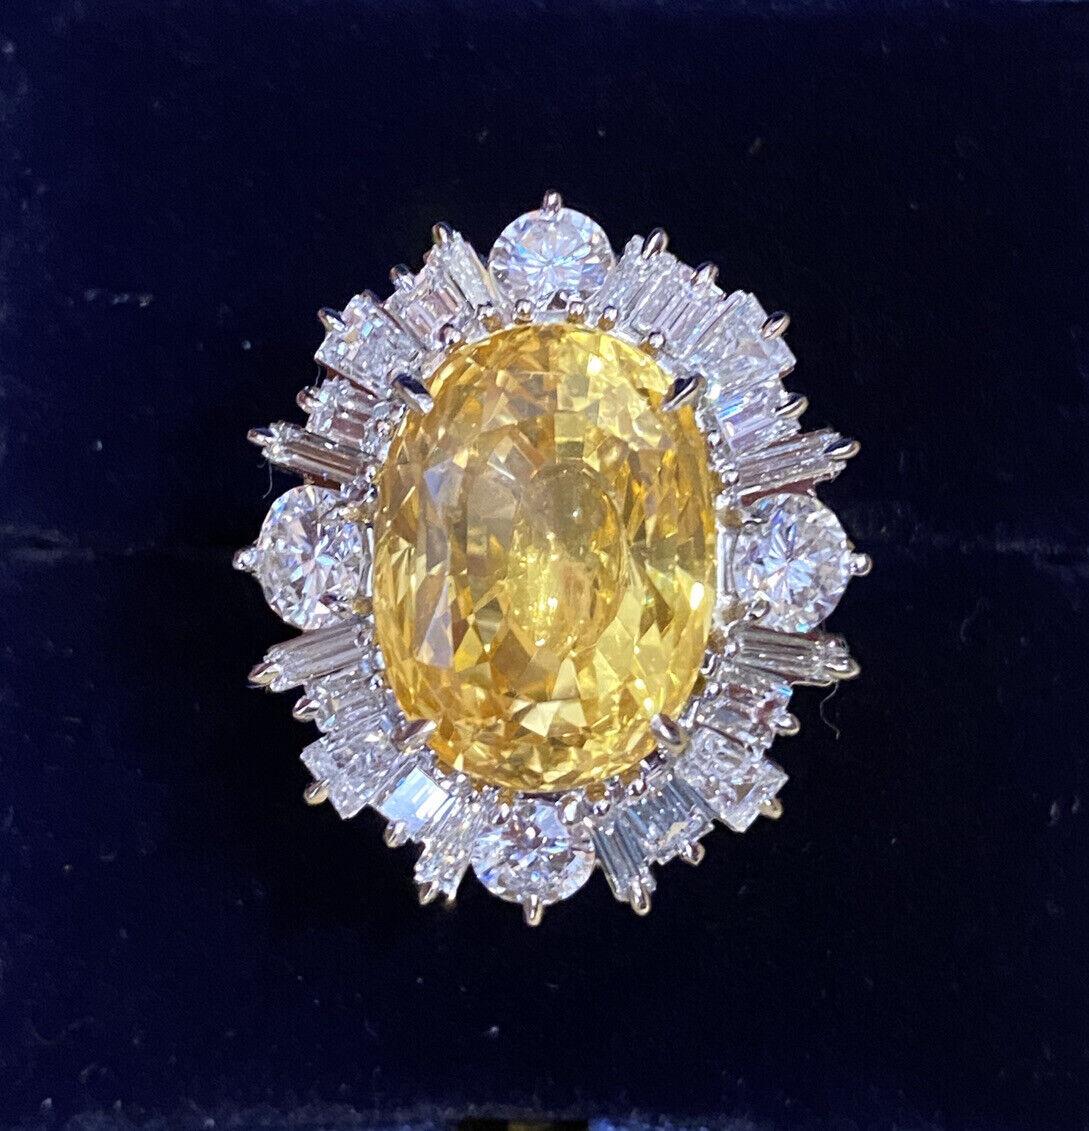 GIA Certified 19.89 Carat Unheated Yellow Sapphire and Diamond Ring in Platinum

Yellow Sapphire and Diamond Ring features a large Natural Oval Yellow Sapphire in the center surrounded by Round and Tapered Baguette Diamonds set in platinum. 

The